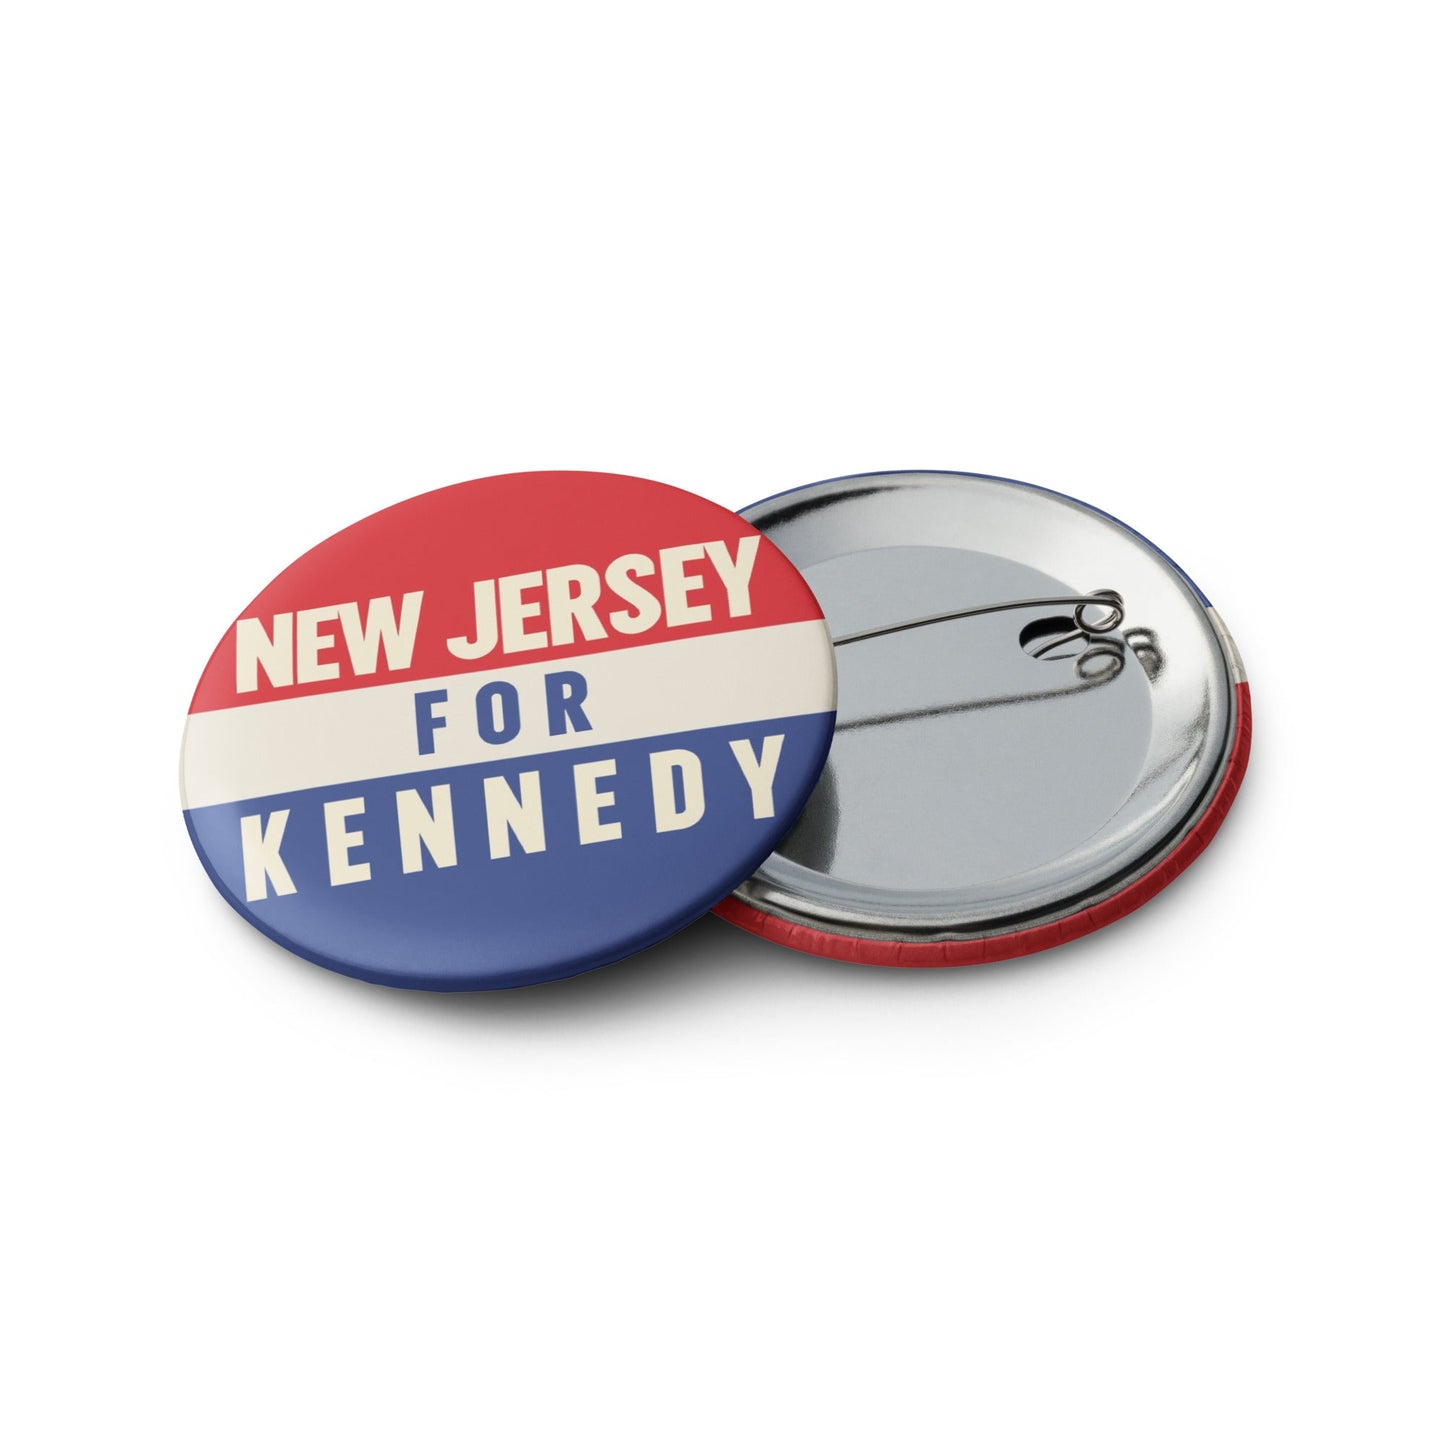 New Jersey for Kennedy (5 Buttons) - TEAM KENNEDY. All rights reserved